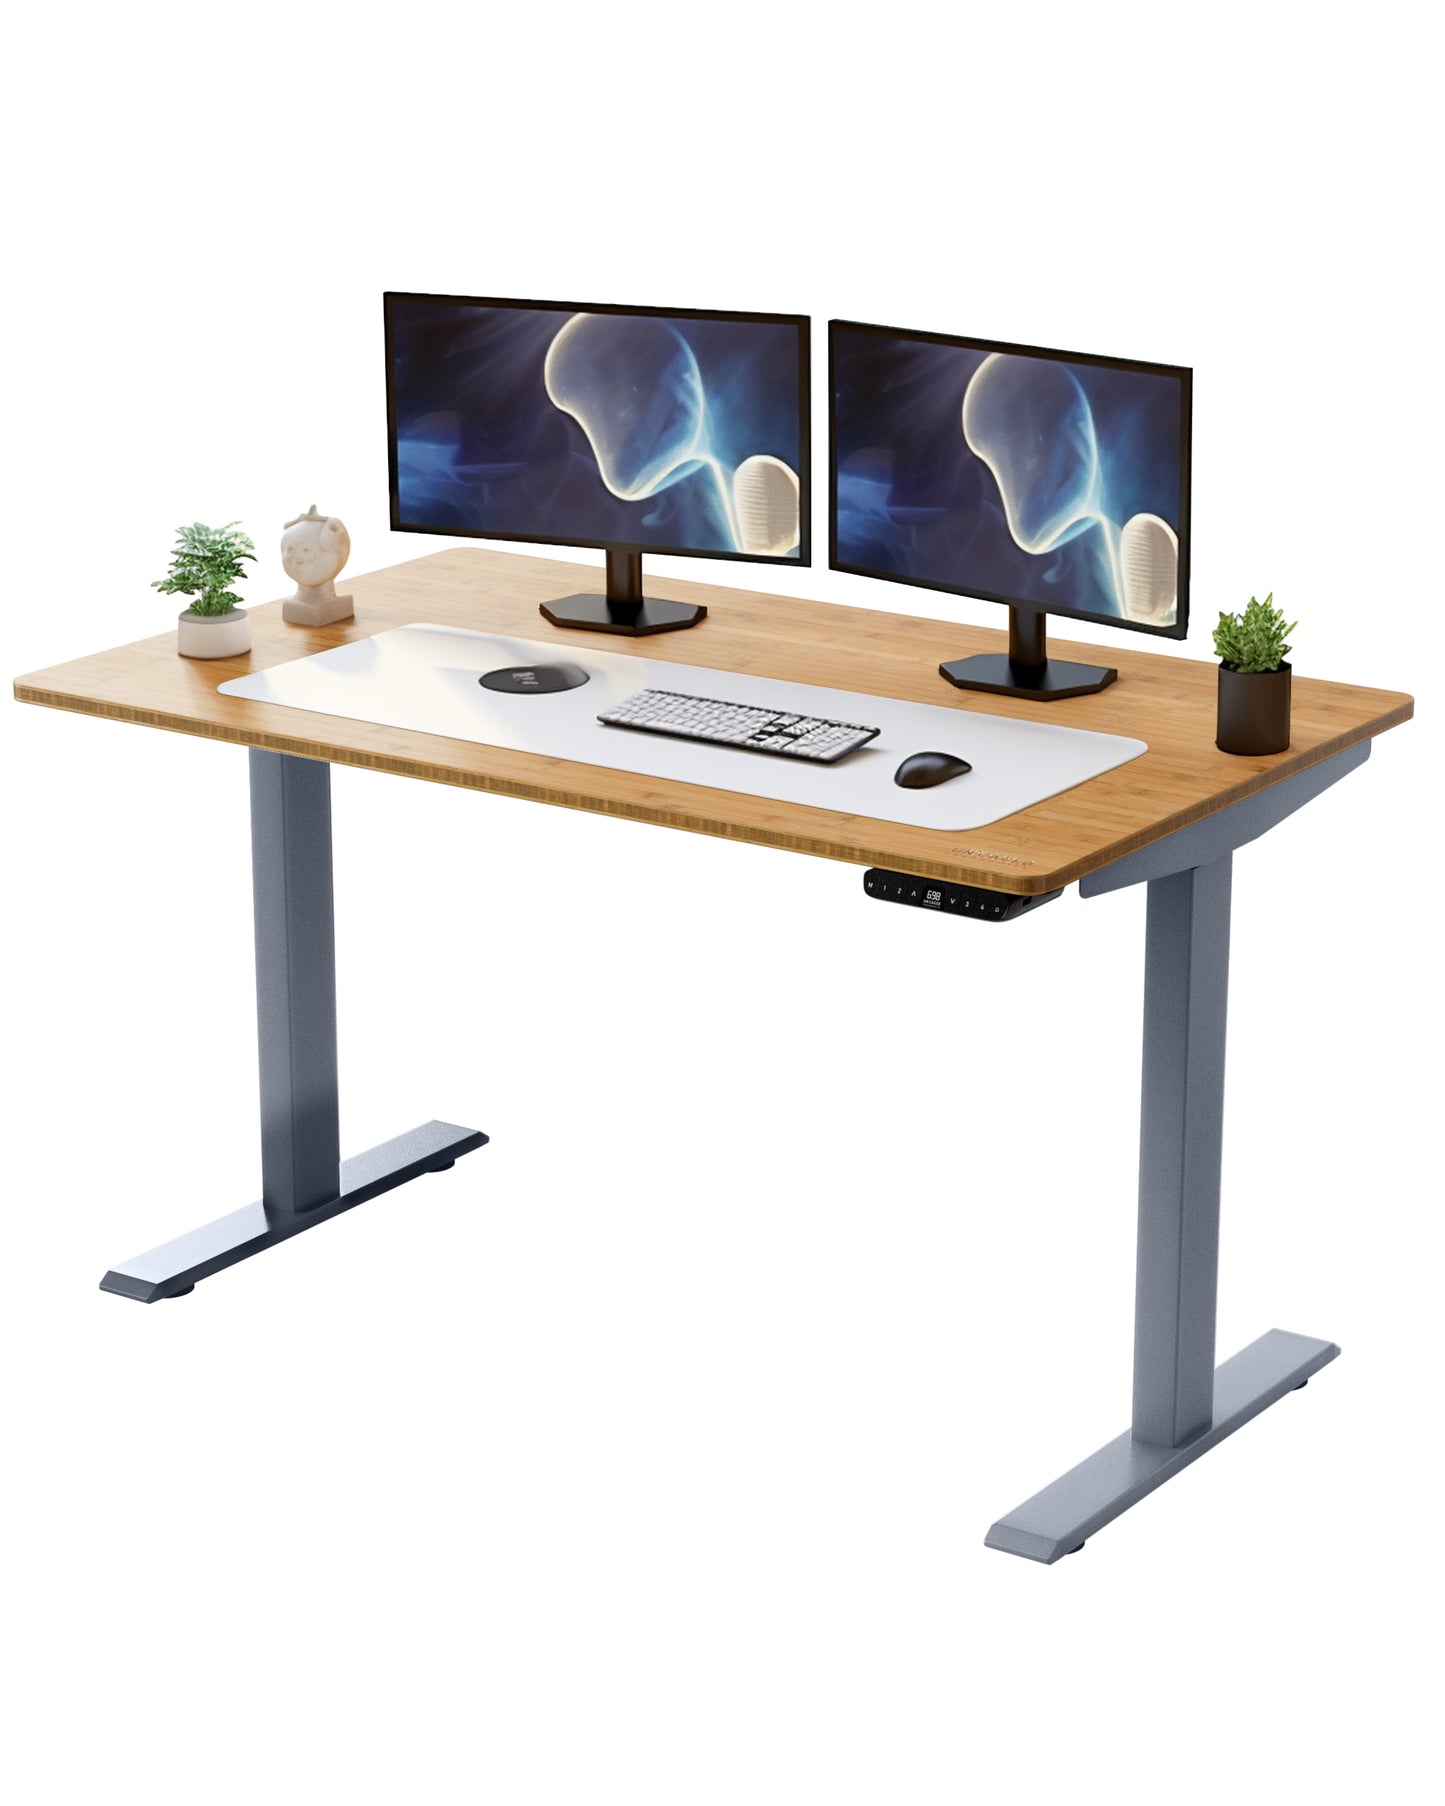 Premium Dual Motor Electric Office Adjustable Desk - Gray and Natural Bamboo